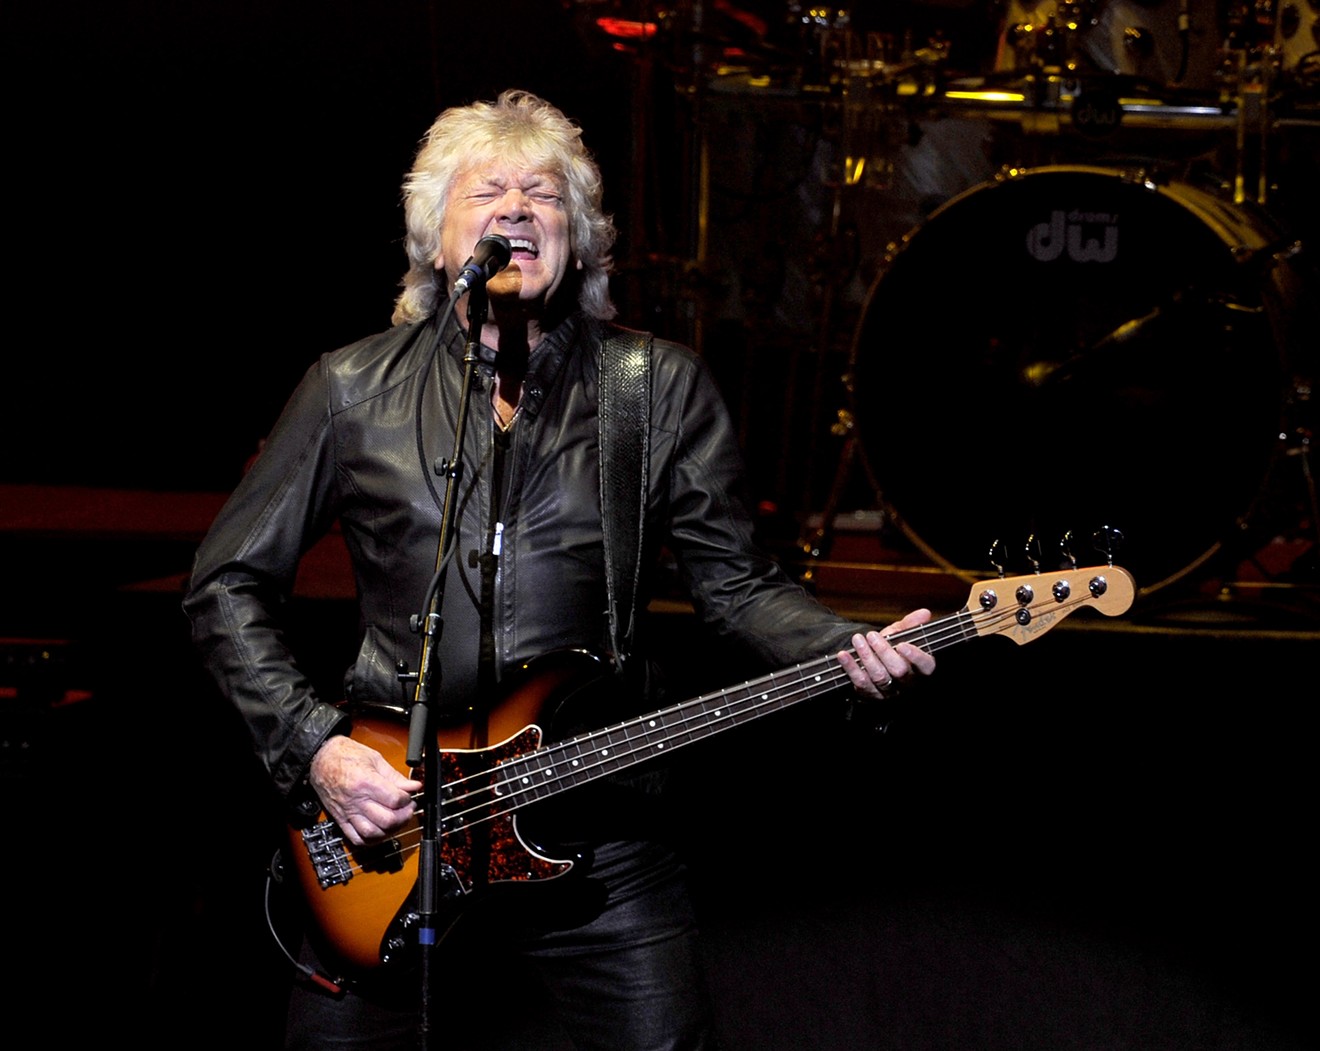 John Lodge performing with the Moody Blues in Los Angeles